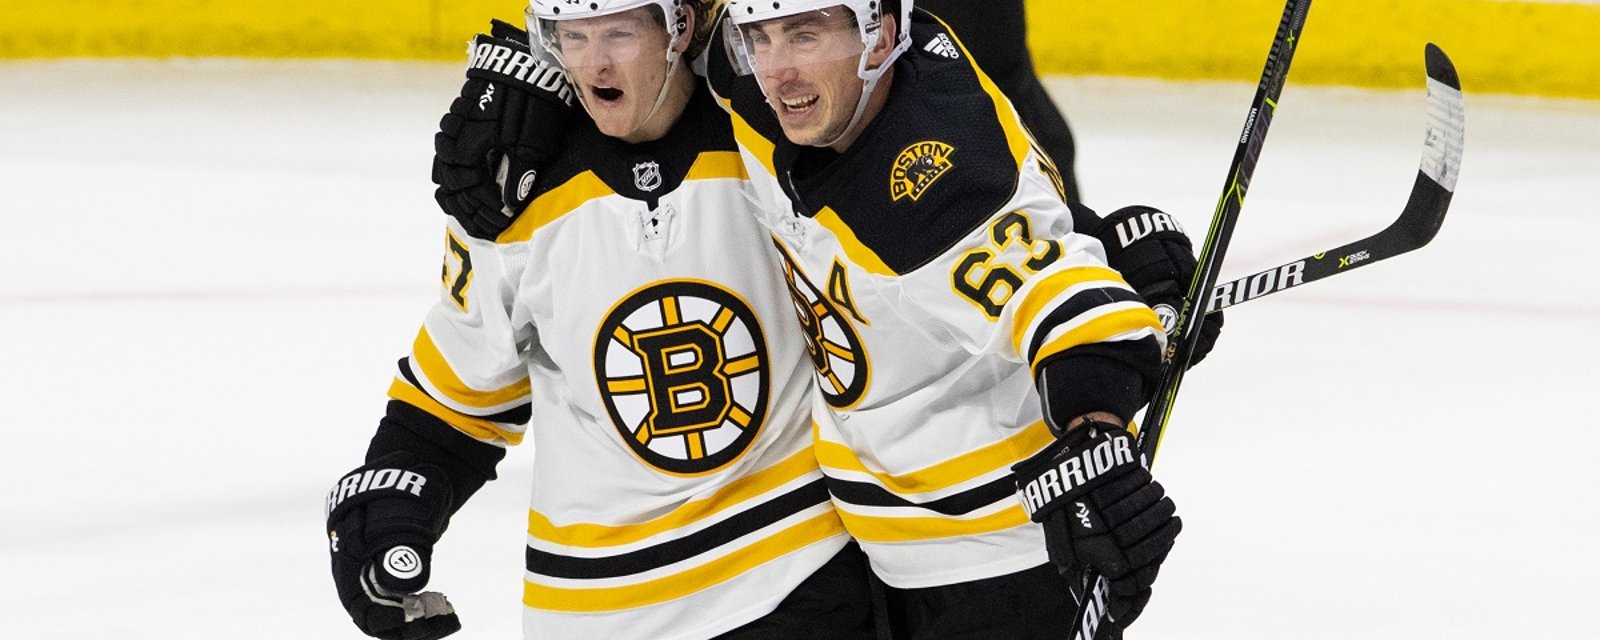 Brad Marchand gets roasted by his own teammate on social media.